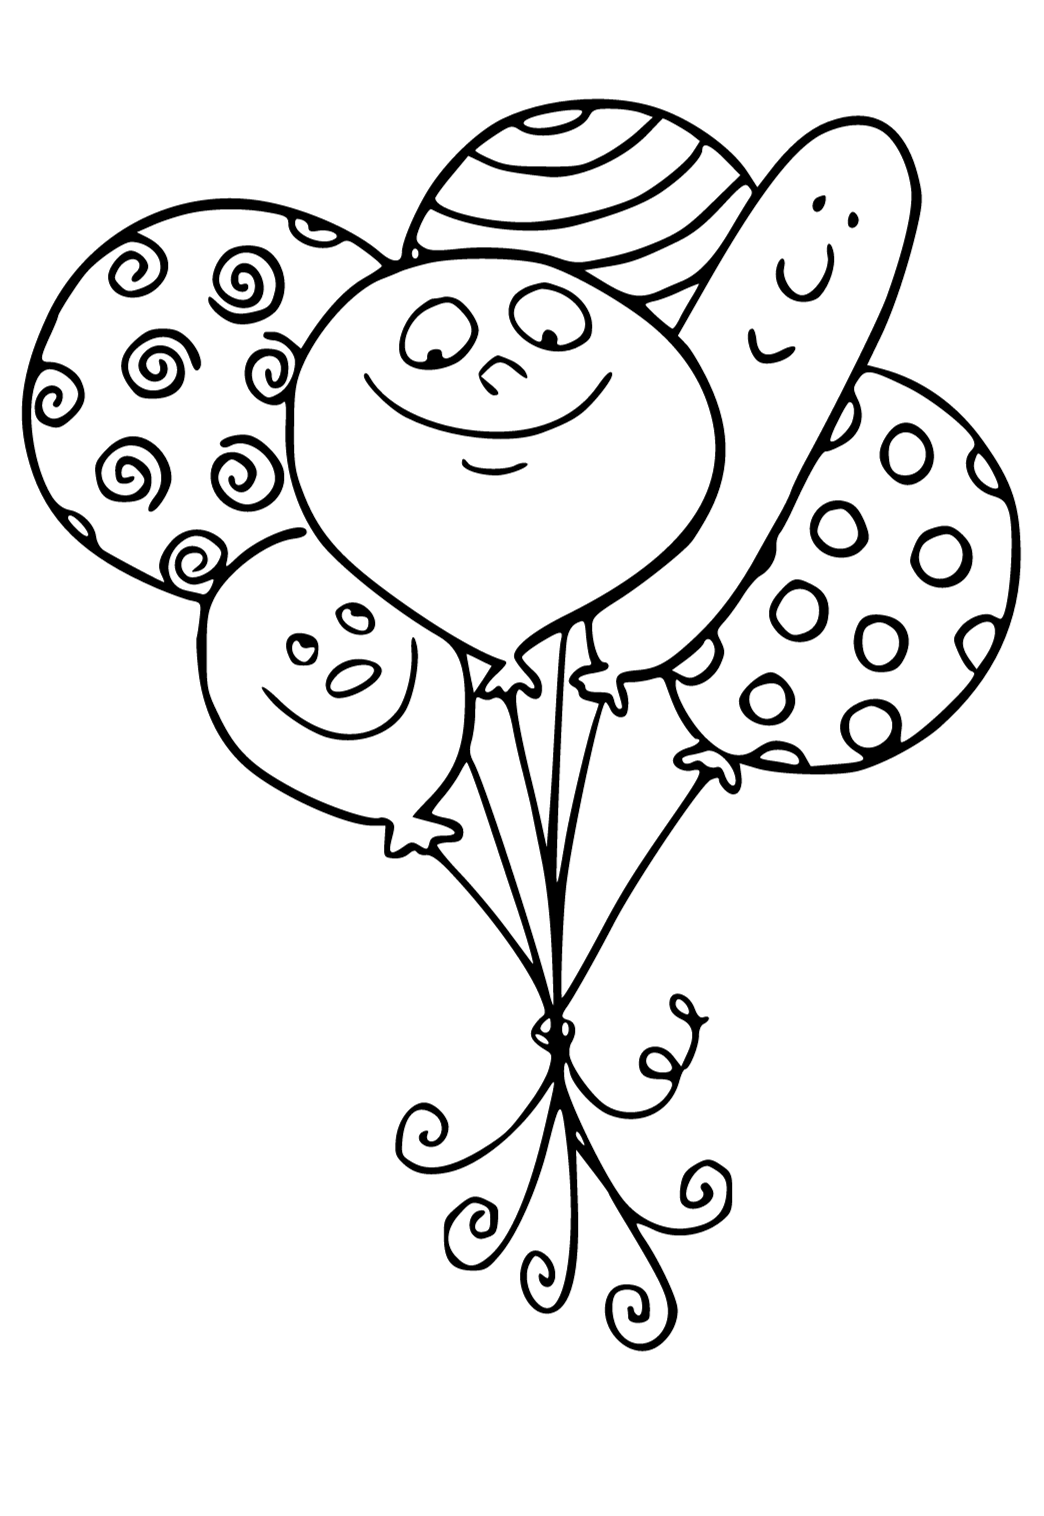 Free printable balloon funny coloring page for adults and kids